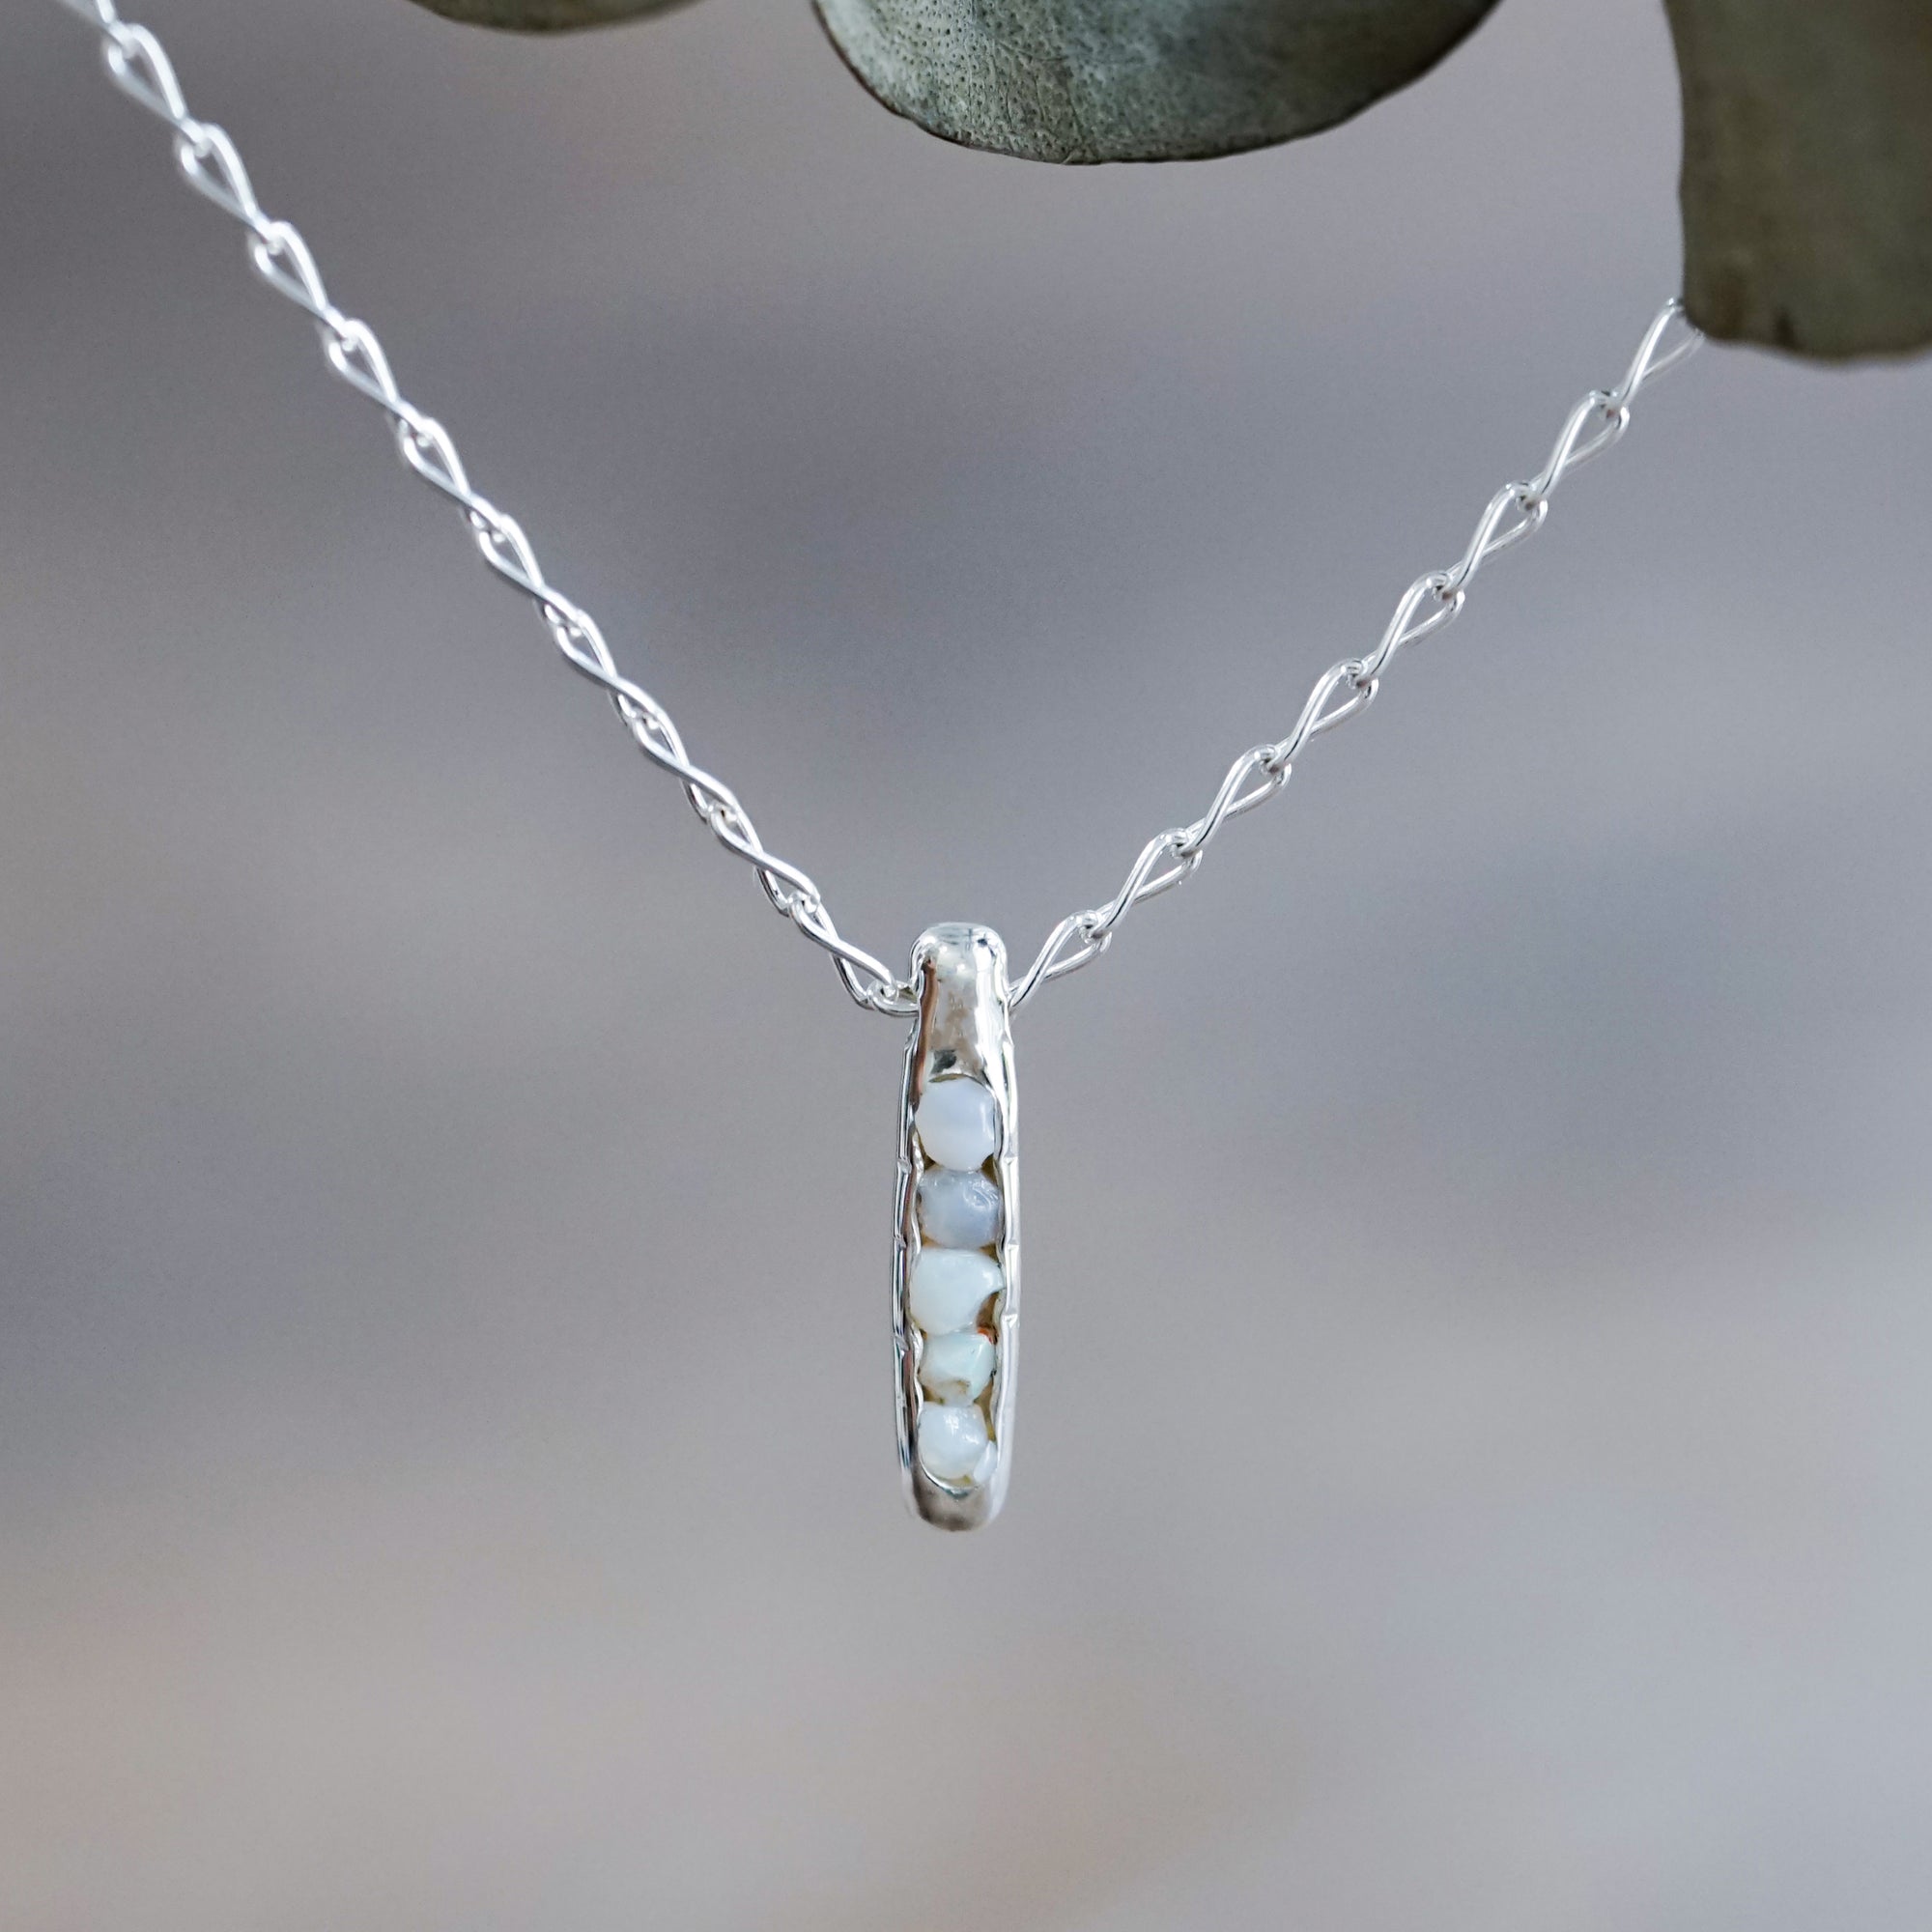 Rough Opal Necklace with Hidden Gems - Gardens of the Sun | Ethical Jewelry